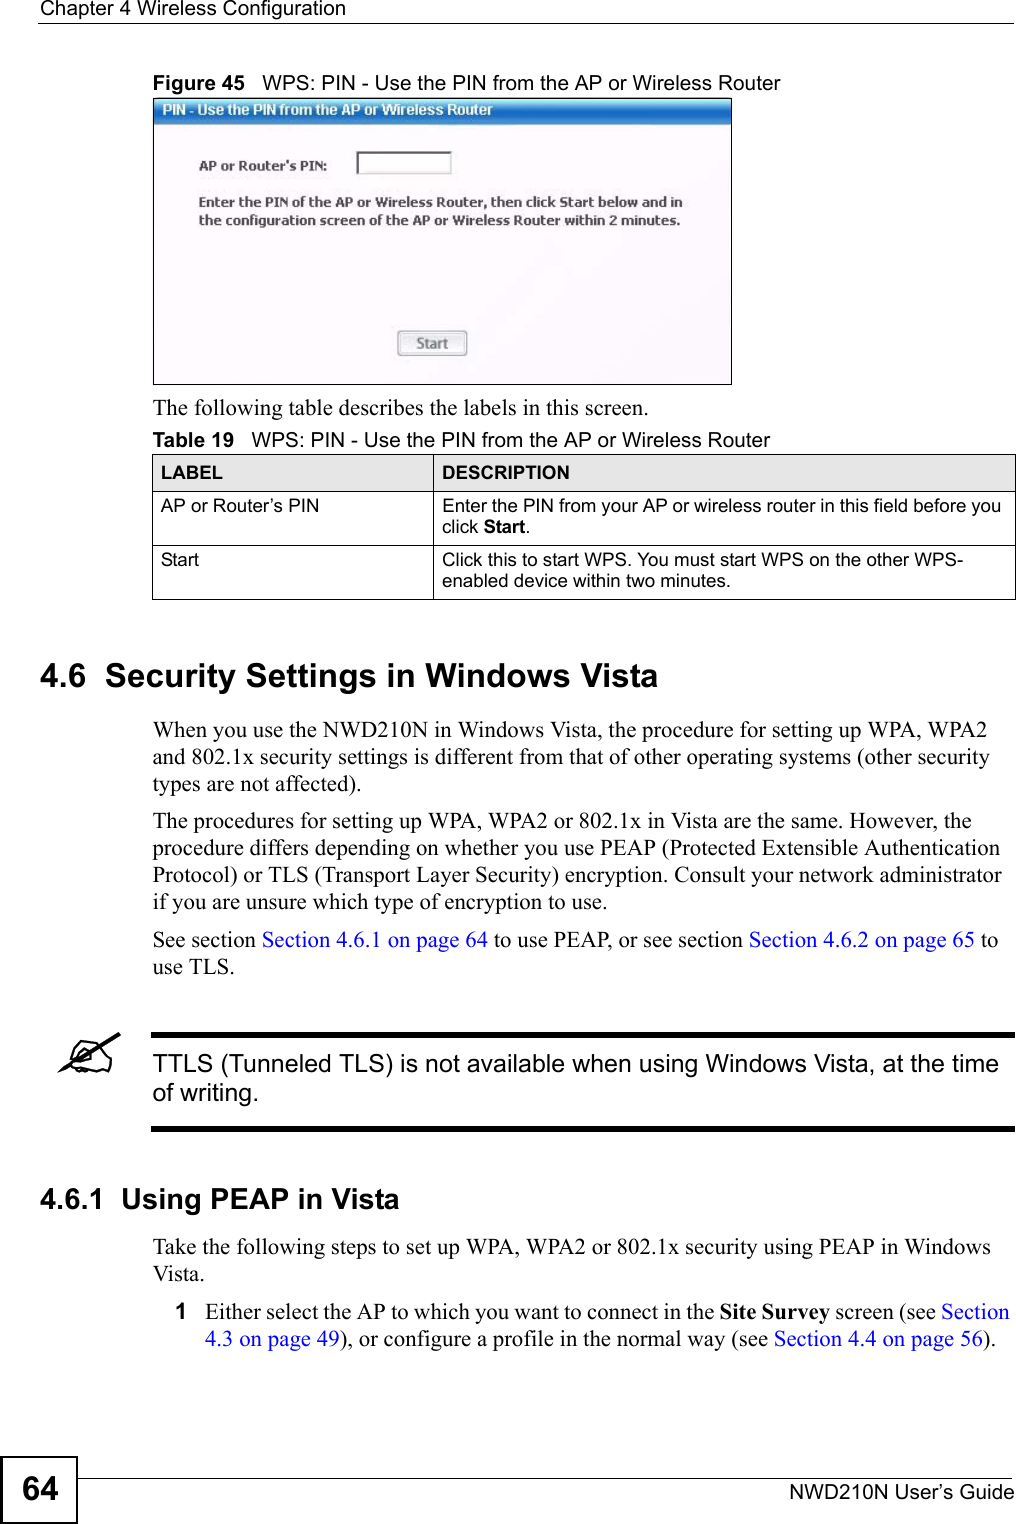 Chapter 4 Wireless ConfigurationNWD210N User’s Guide64Figure 45   WPS: PIN - Use the PIN from the AP or Wireless RouterThe following table describes the labels in this screen. 4.6  Security Settings in Windows Vista When you use the NWD210N in Windows Vista, the procedure for setting up WPA, WPA2 and 802.1x security settings is different from that of other operating systems (other security types are not affected).The procedures for setting up WPA, WPA2 or 802.1x in Vista are the same. However, the procedure differs depending on whether you use PEAP (Protected Extensible Authentication Protocol) or TLS (Transport Layer Security) encryption. Consult your network administrator if you are unsure which type of encryption to use. See section Section 4.6.1 on page 64 to use PEAP, or see section Section 4.6.2 on page 65 to use TLS.&quot;TTLS (Tunneled TLS) is not available when using Windows Vista, at the time of writing.4.6.1  Using PEAP in VistaTake the following steps to set up WPA, WPA2 or 802.1x security using PEAP in Windows Vista.1Either select the AP to which you want to connect in the Site Survey screen (see Section 4.3 on page 49), or configure a profile in the normal way (see Section 4.4 on page 56).Table 19   WPS: PIN - Use the PIN from the AP or Wireless RouterLABEL DESCRIPTIONAP or Router’s PIN Enter the PIN from your AP or wireless router in this field before you click Start.Start Click this to start WPS. You must start WPS on the other WPS-enabled device within two minutes.